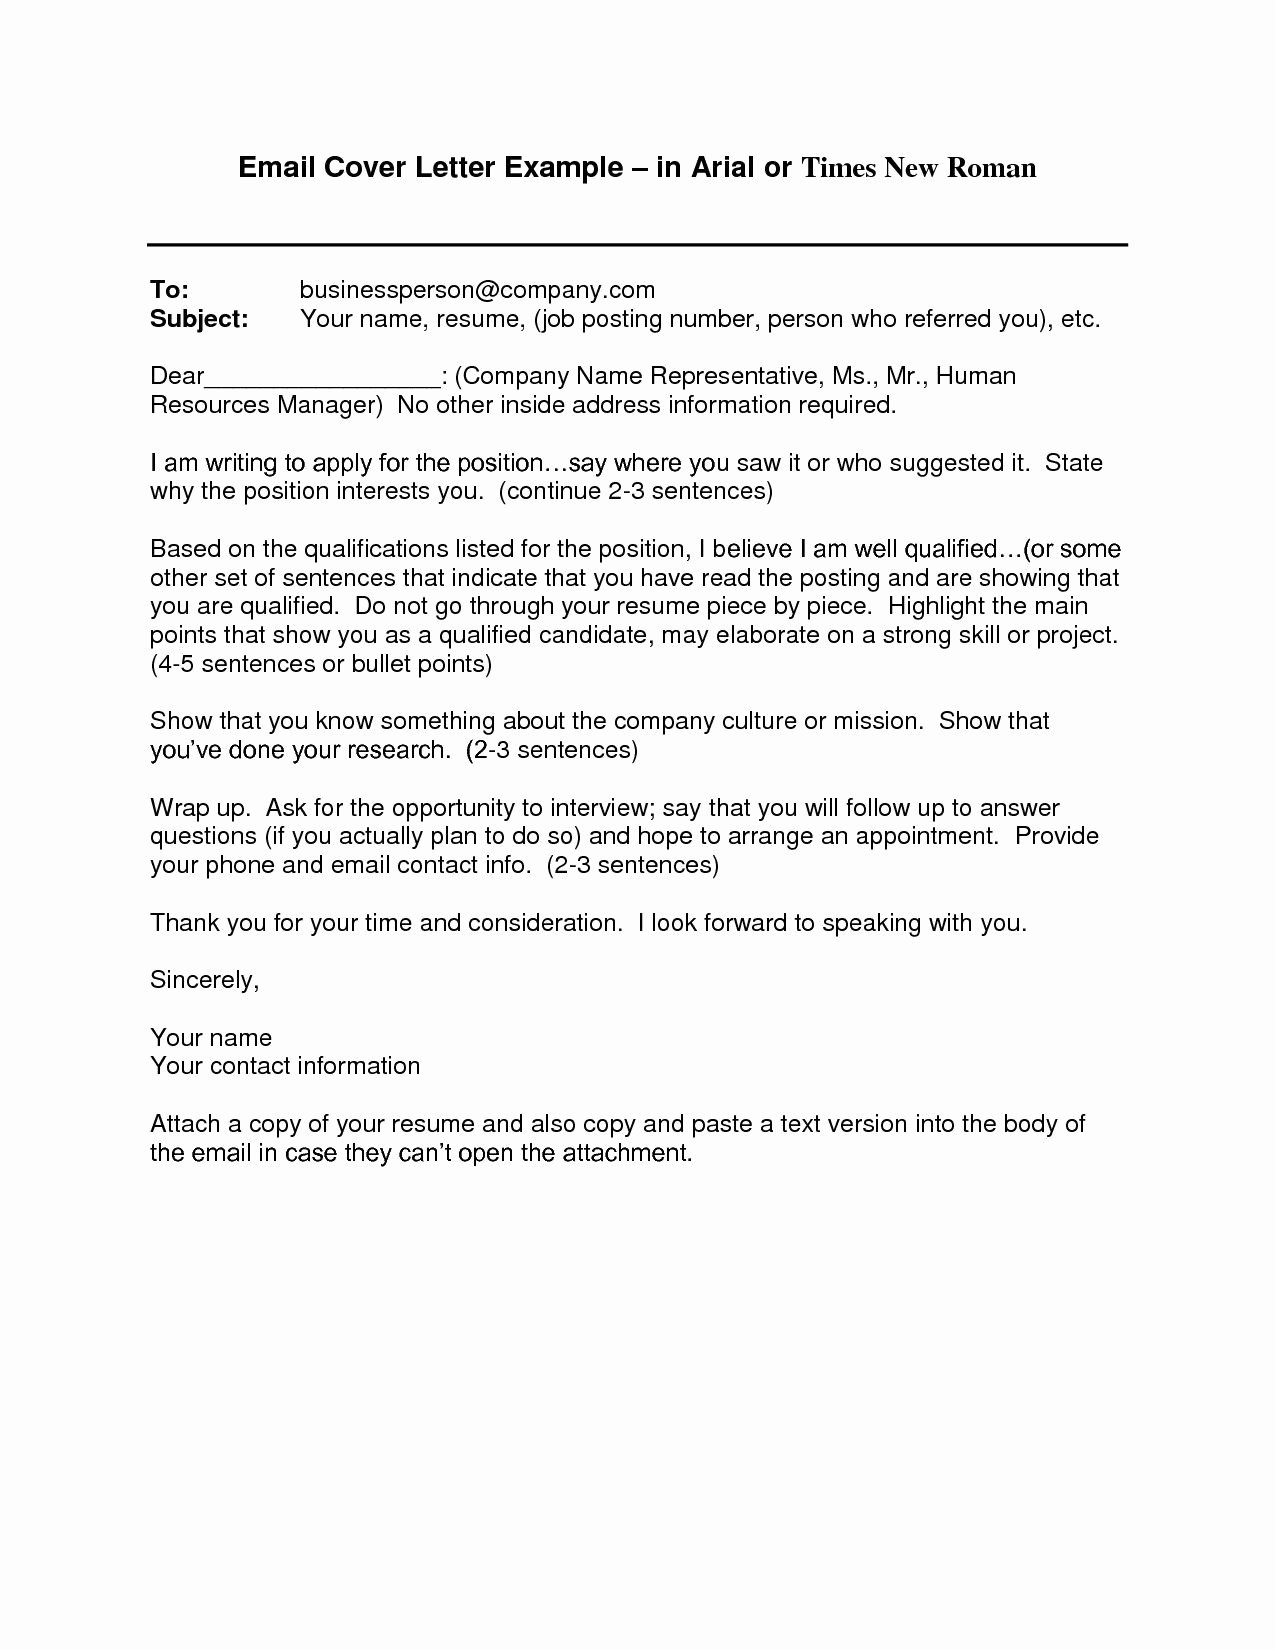 Email Cover Letter Templates Awesome Cover Letter Template Via Email